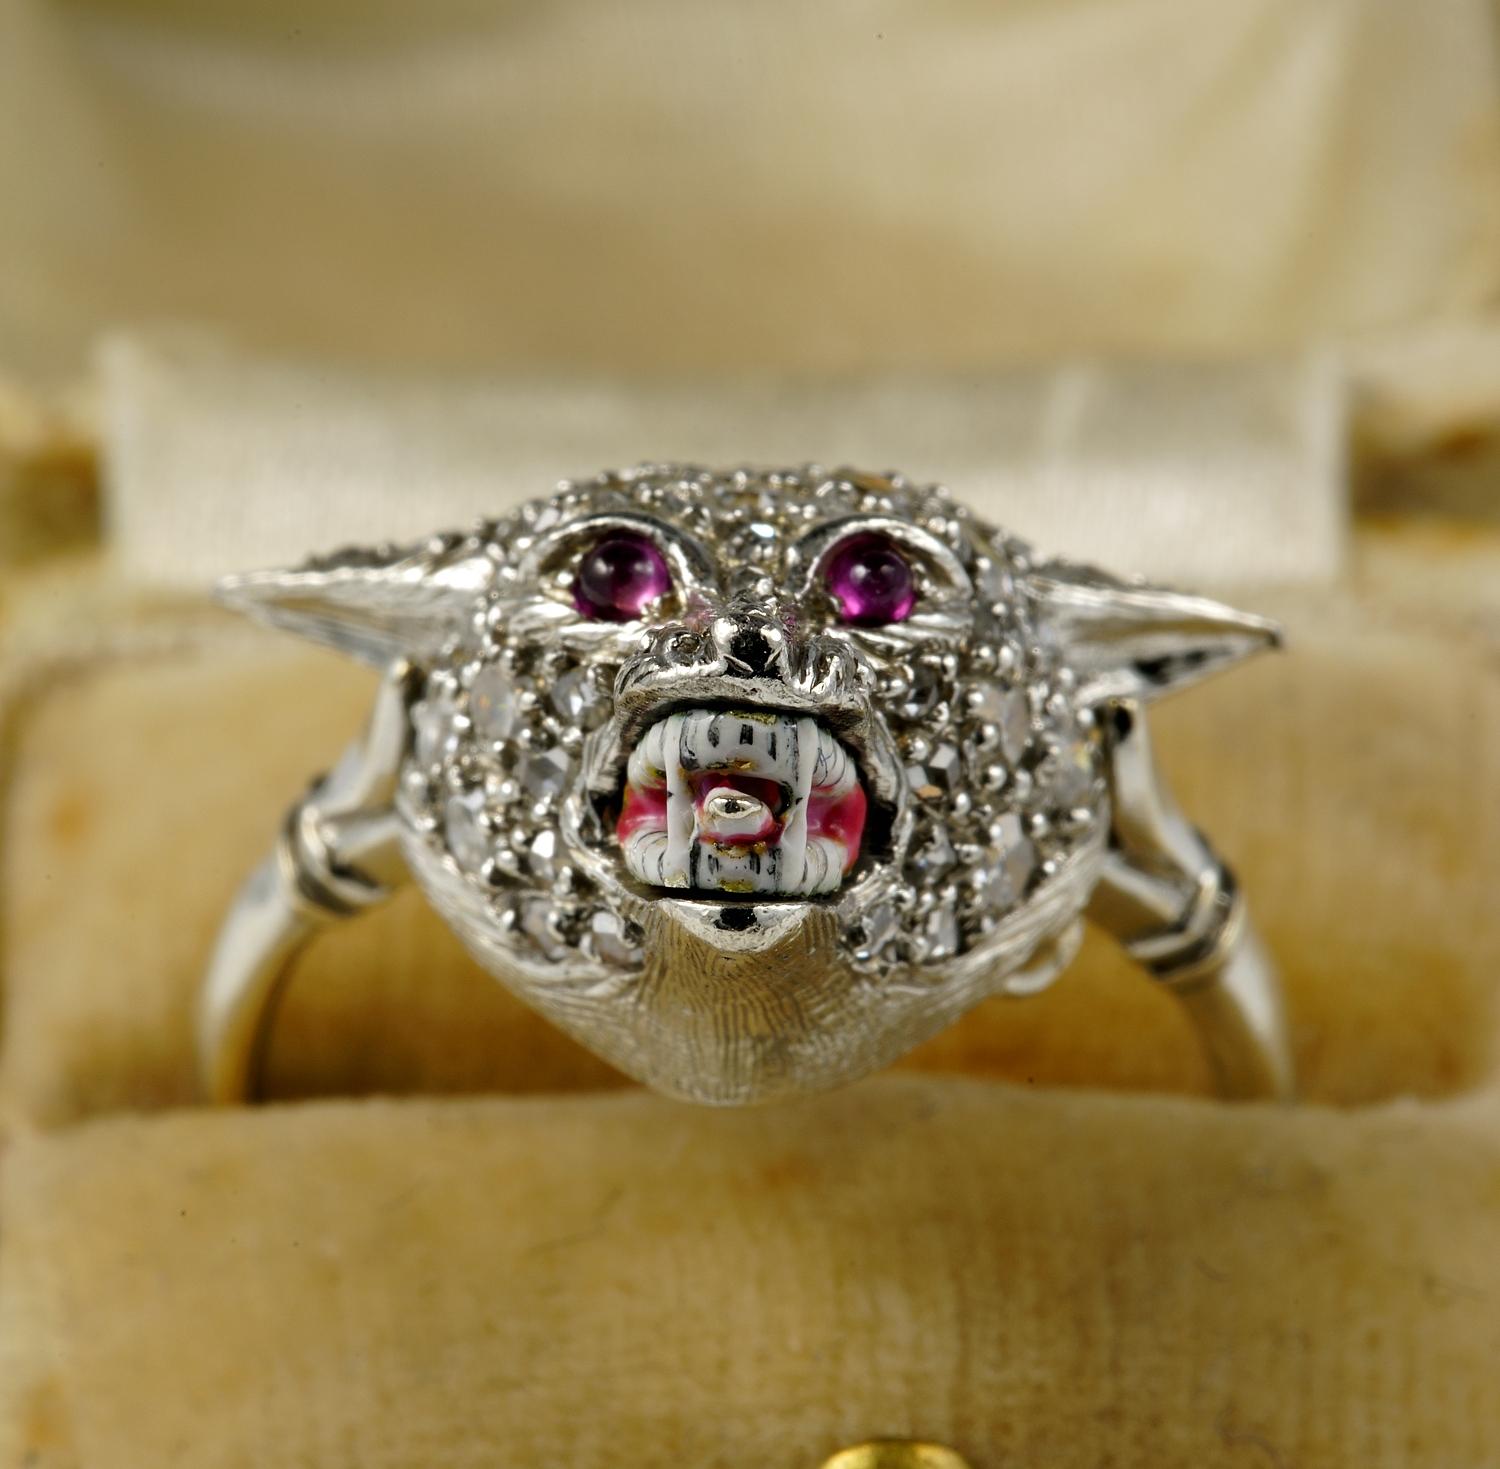 The Unique!

Wolf power or spirit animals point to an appetite for freedom and living life powerfully, guided by instincts

English origin, very rare example, Edwardian ring

Greatly modelled from solid Platinum as the entire ring is, wolf head,